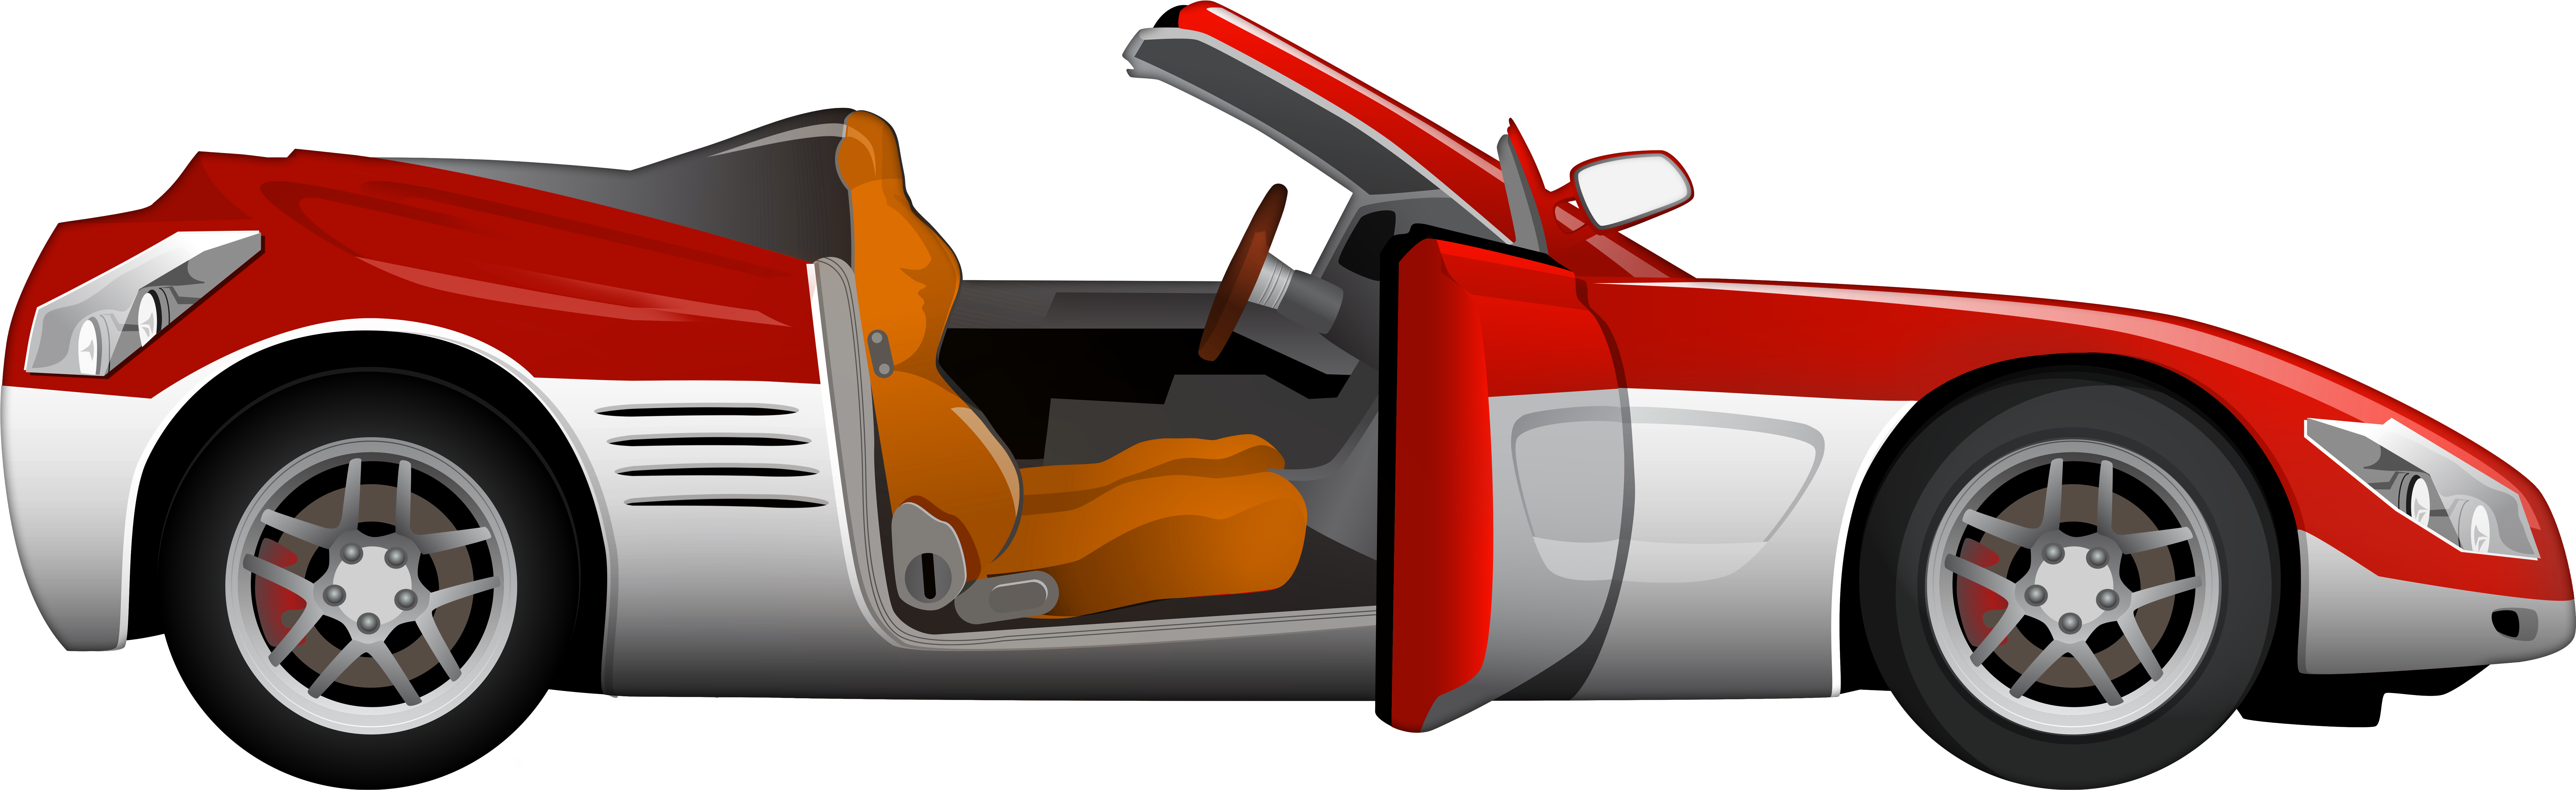 Red Cabriolet Sport Car Png Clip Art - Red Cabriolet Sport Car Png Clip Art (8000x2504)